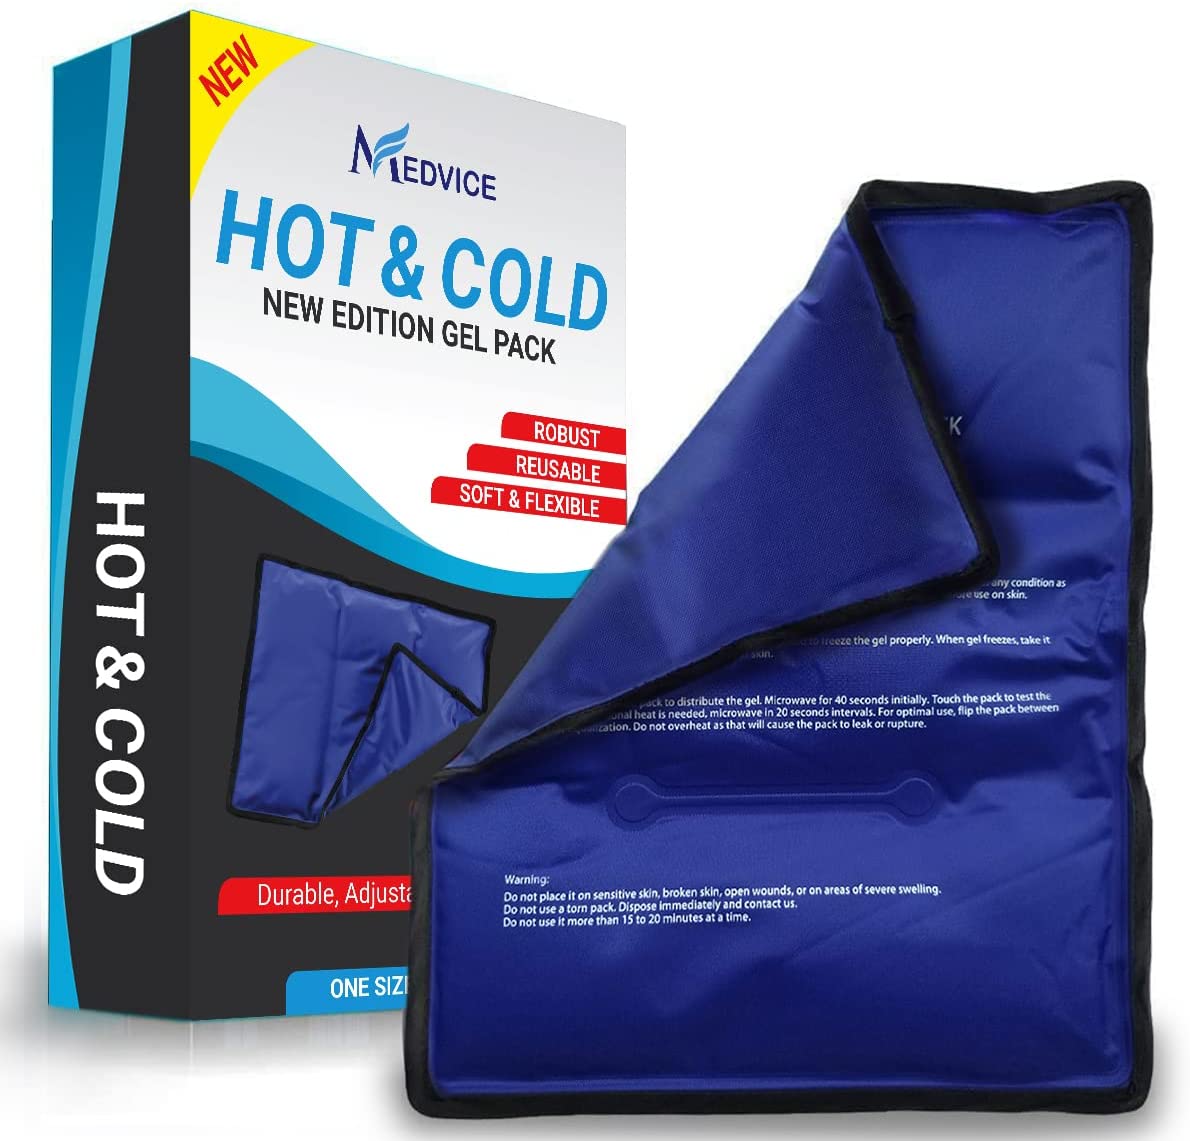 Medvics's Hot and Cold Pack for pain releif